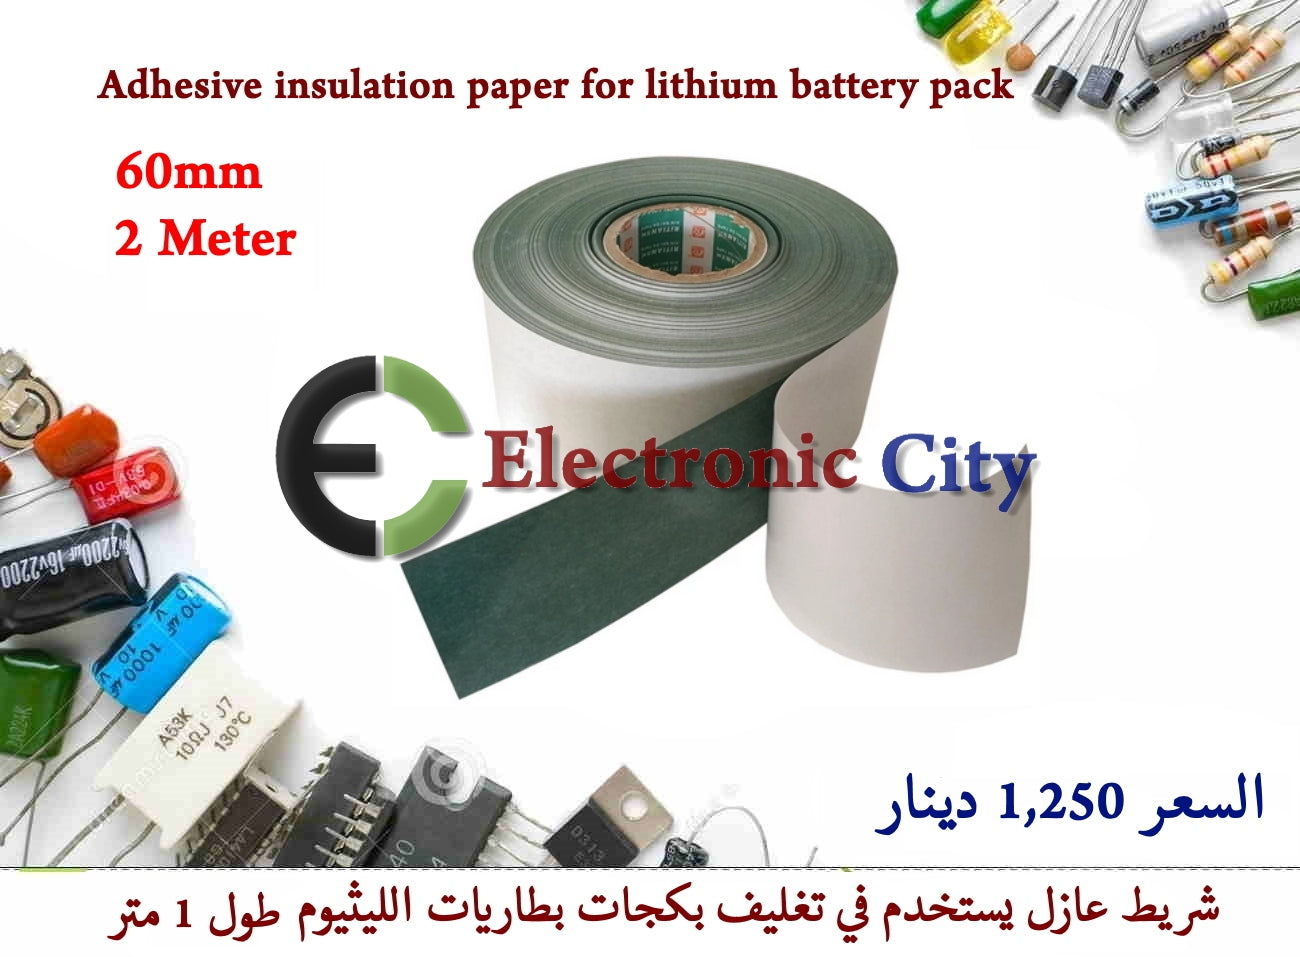 Adhesive insulation paper for lithium battery pack 60mm 2M